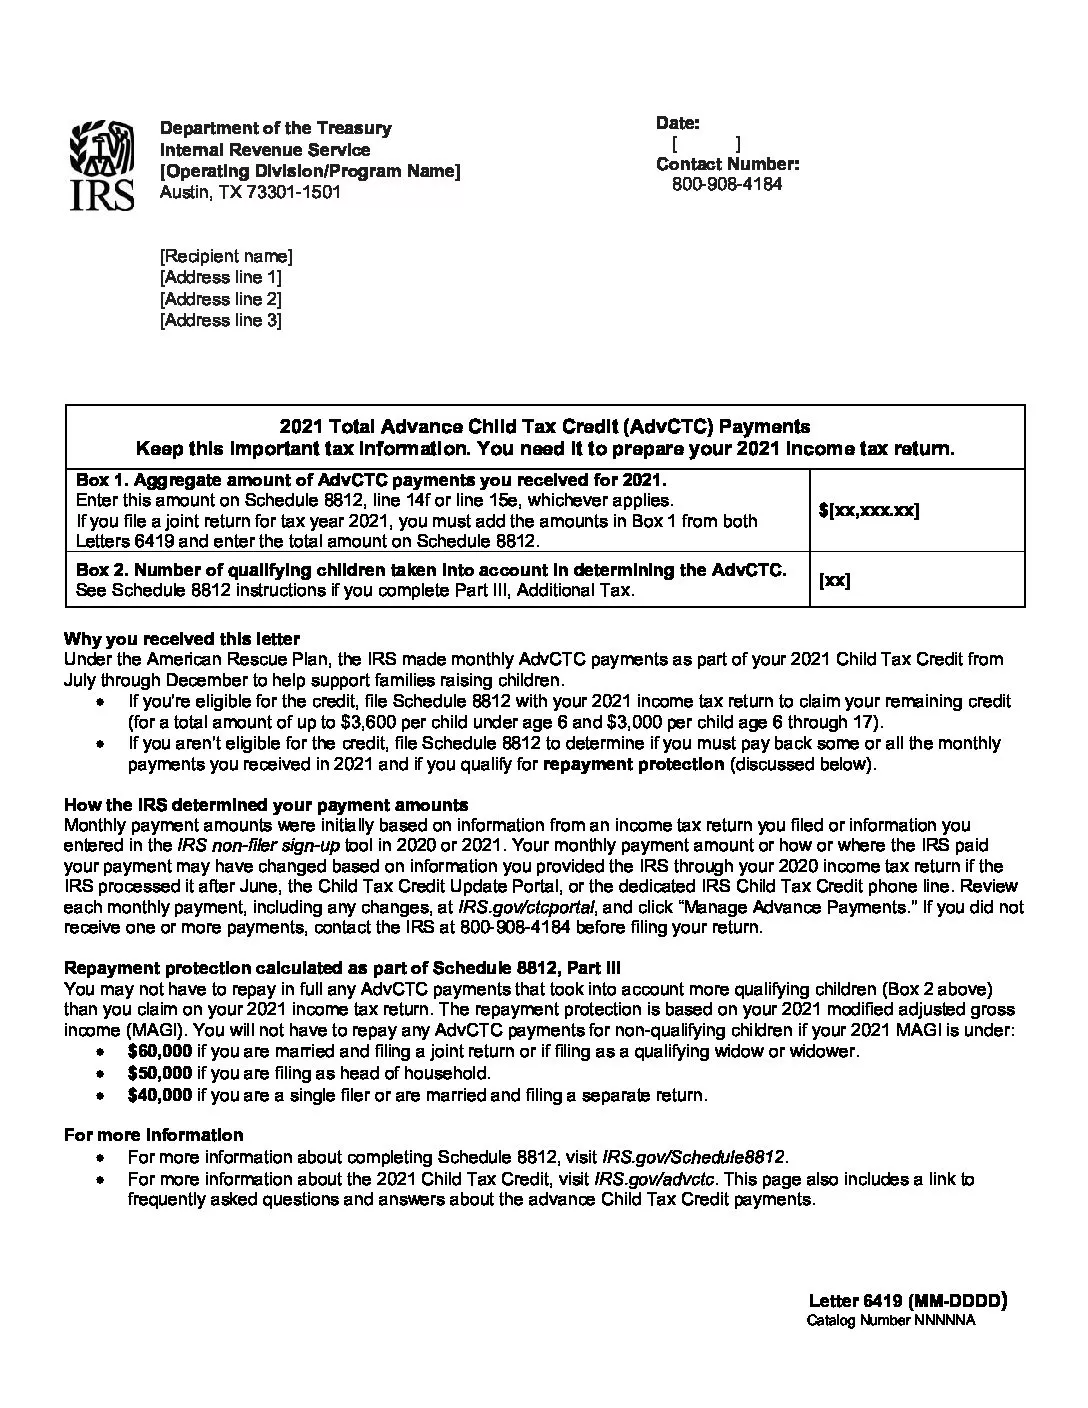 copy of letter 6419 irs